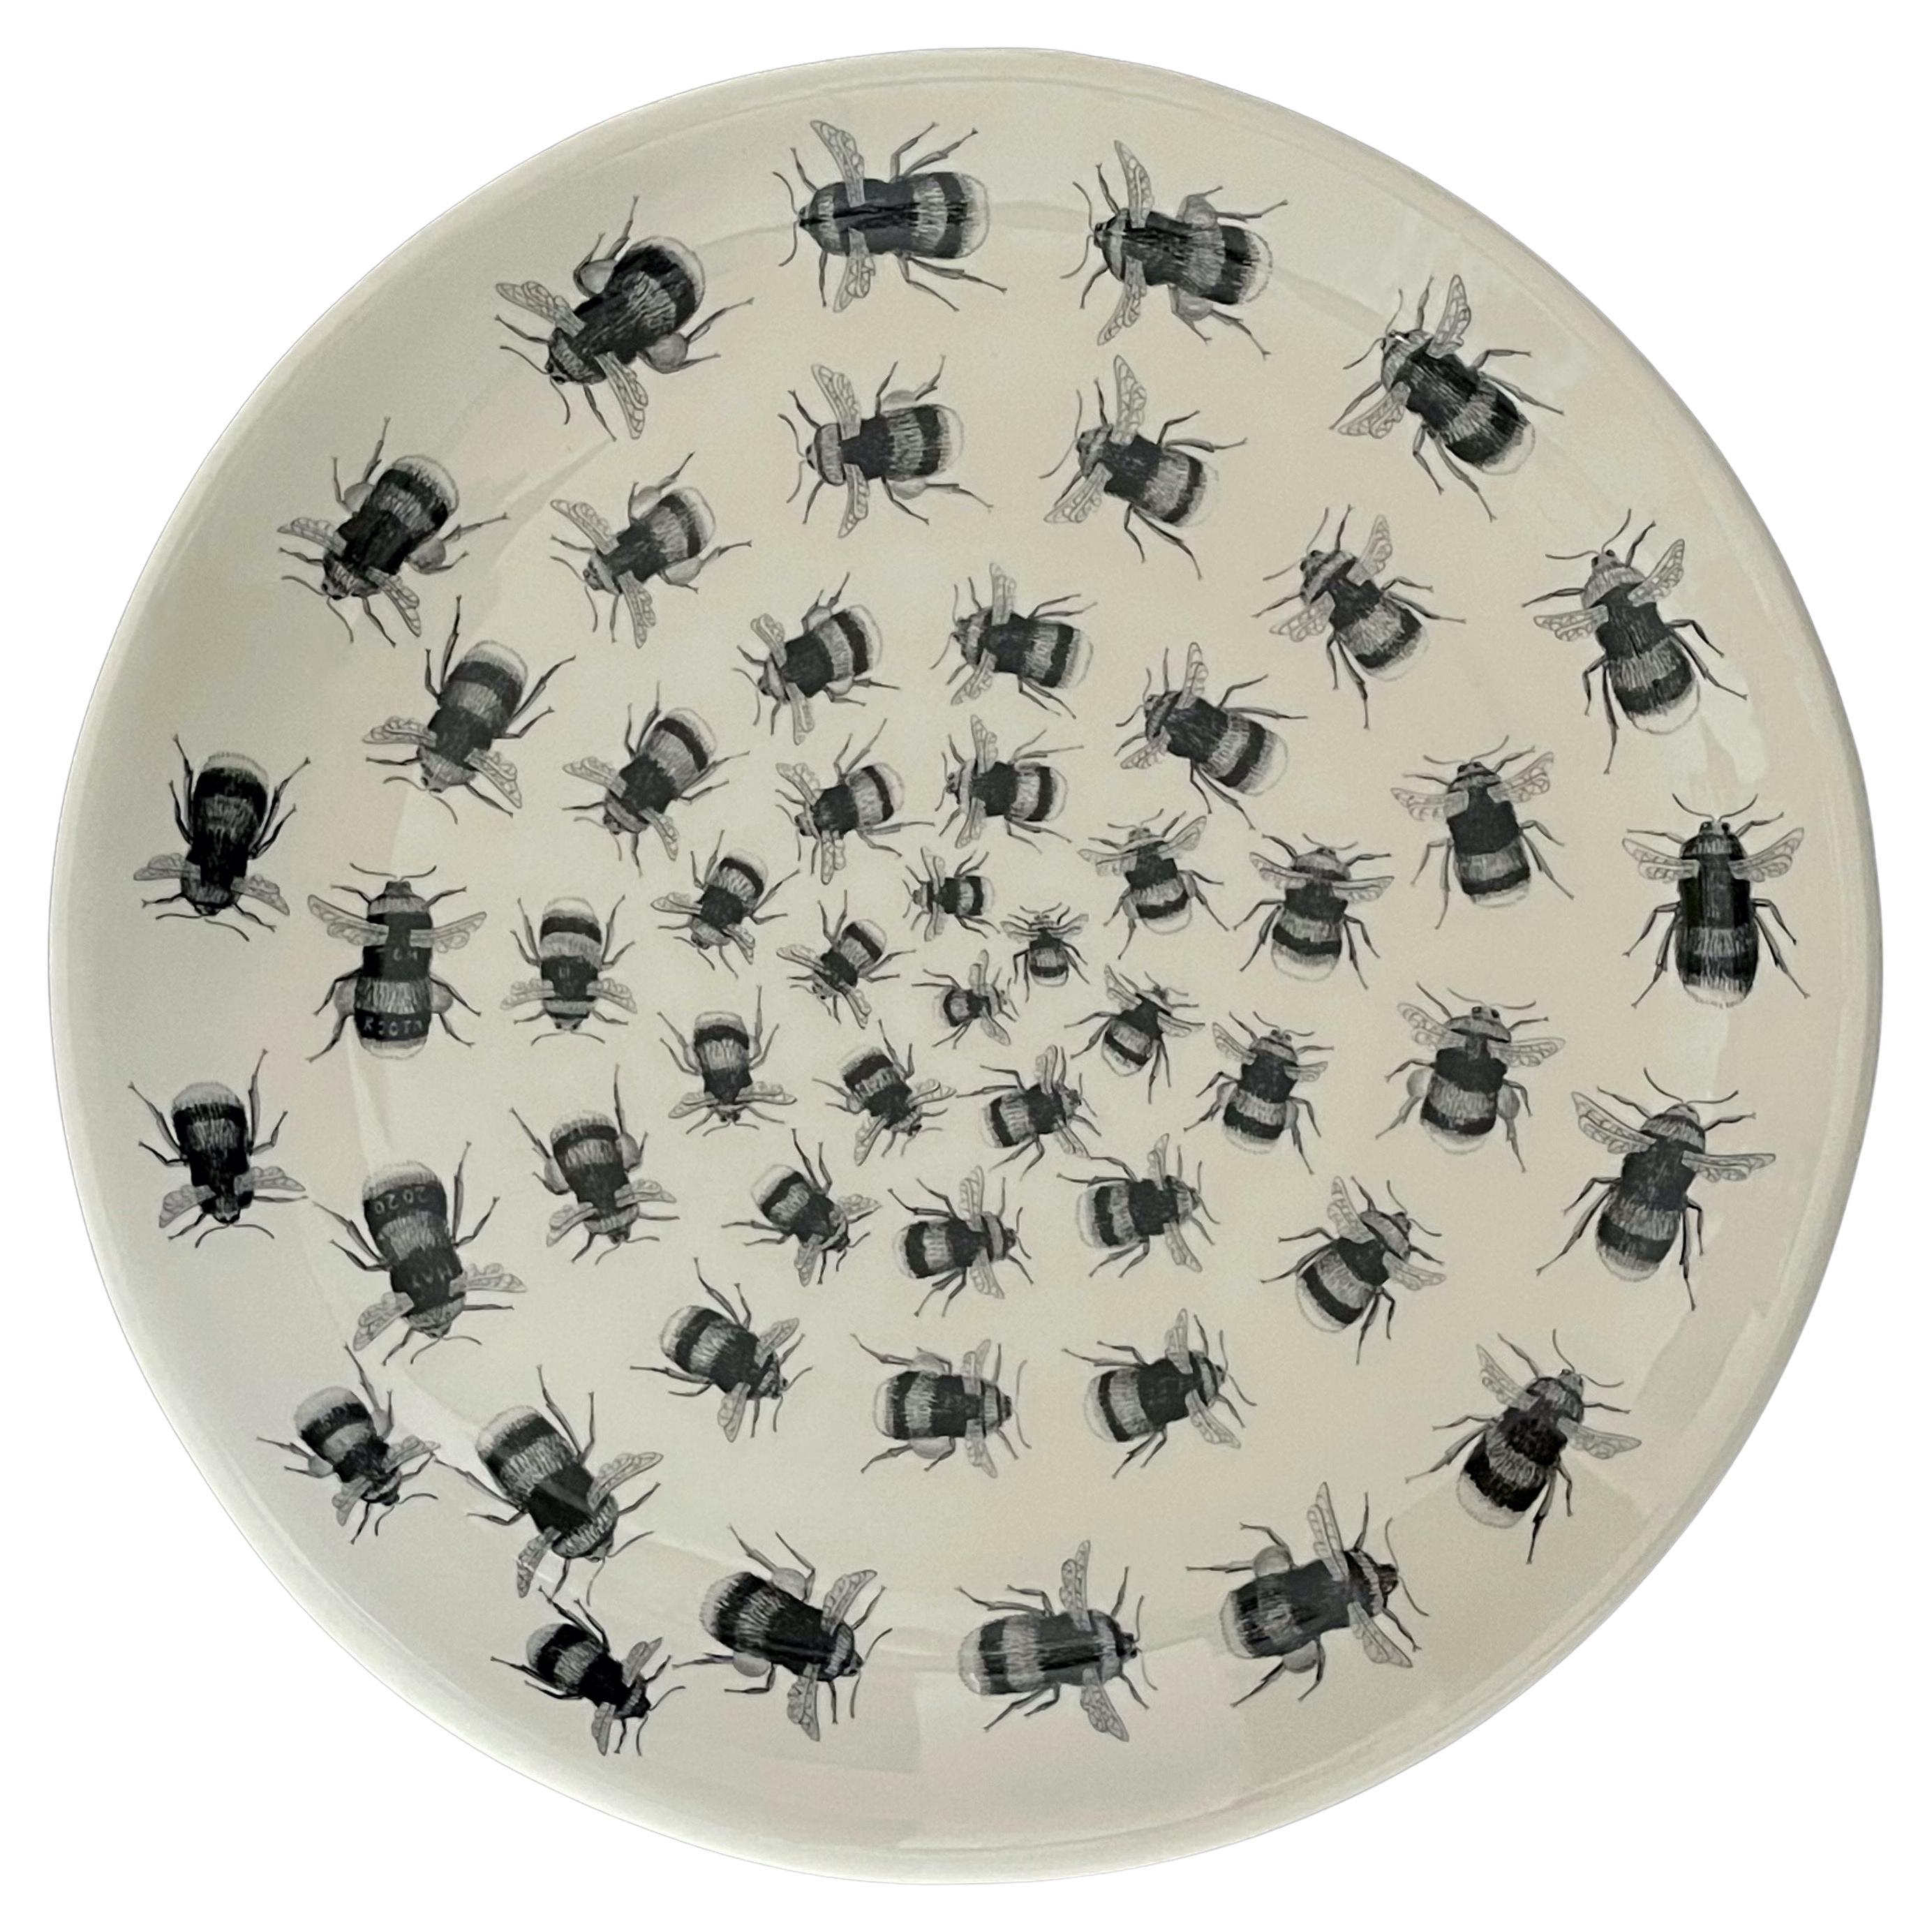 « The Signed Bee Flying in the Opposite Direction » (la abeille volant dans la direction opposée), de Tom Rooth